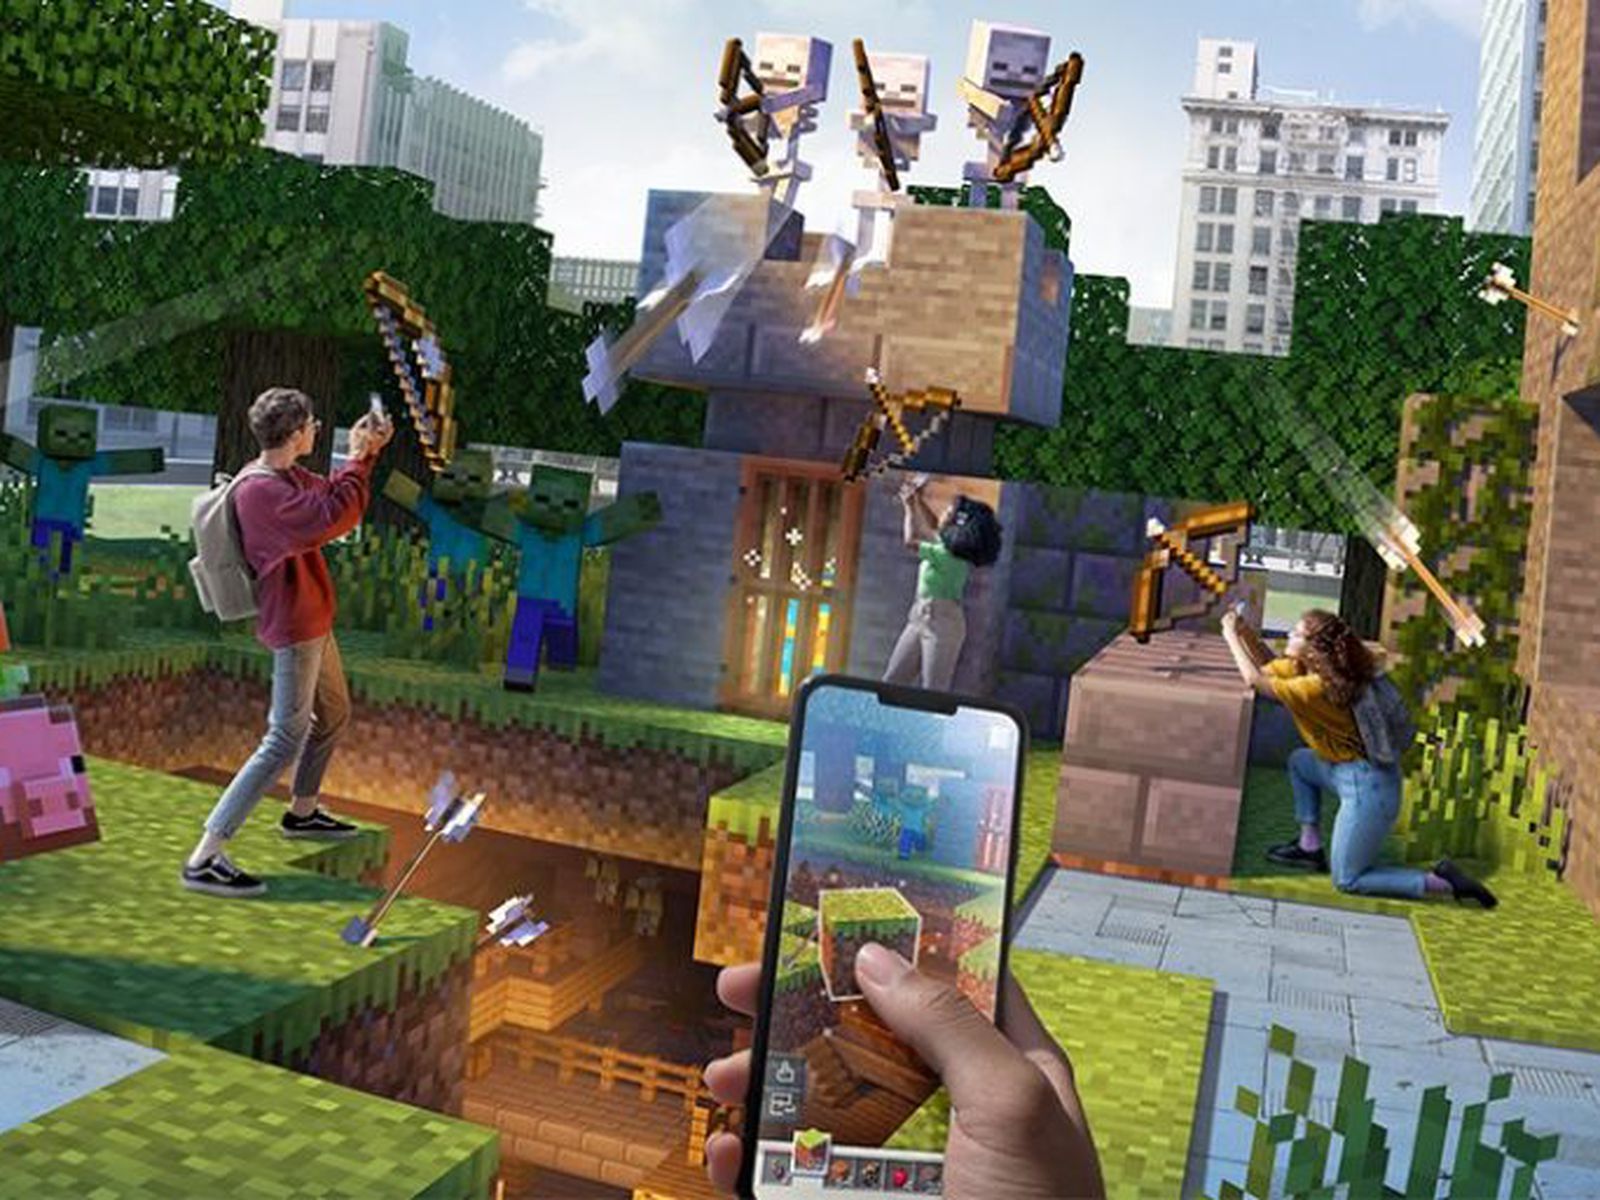 Minecraft Earth' Mobile AR Game to Down Later This MacRumors